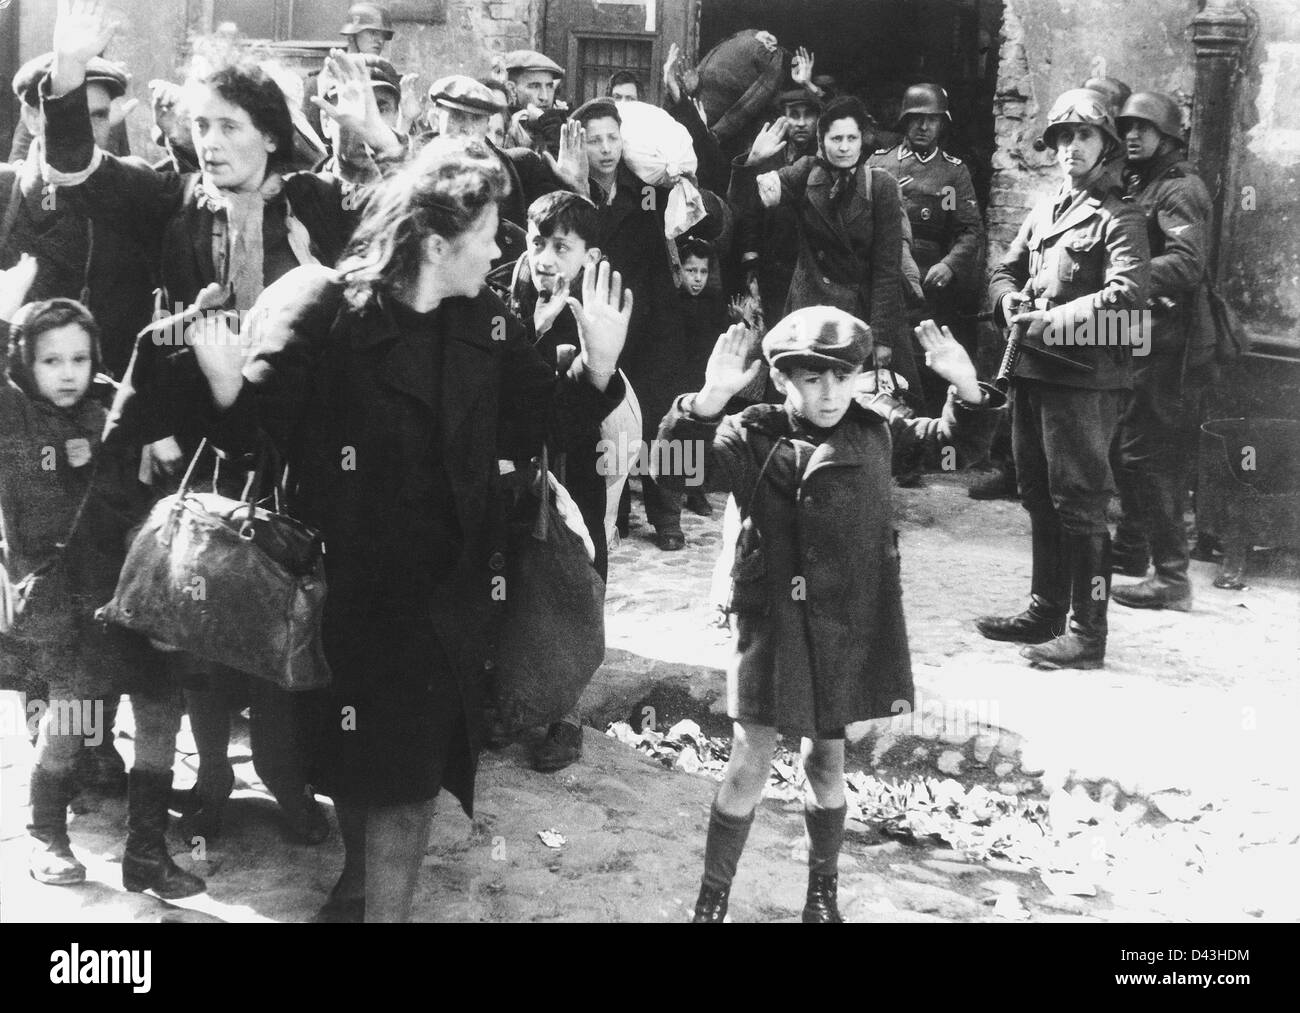 Jewish civilians are forcibly removed from the Warsaw ghetto by German SS soldiers during the uprising May 1943. People identified in the picture: Identity of the boy in the front was not confirmed, but is possibly Artur Dab Siemiatek, Levi Zelinwarger (next to his mother, Chana Zelinwarger) or Tsvi Nussbaum. Hanka Lamet - small girl on the left Matylda Lamet Goldfinger - Hanka's mother next to her (second from the left) Leo Kartuziński - teenaged boy in the background with white bag on his shoulder Golda Stavarowski -  SS man with gun, was executed in 1969 Stock Photo